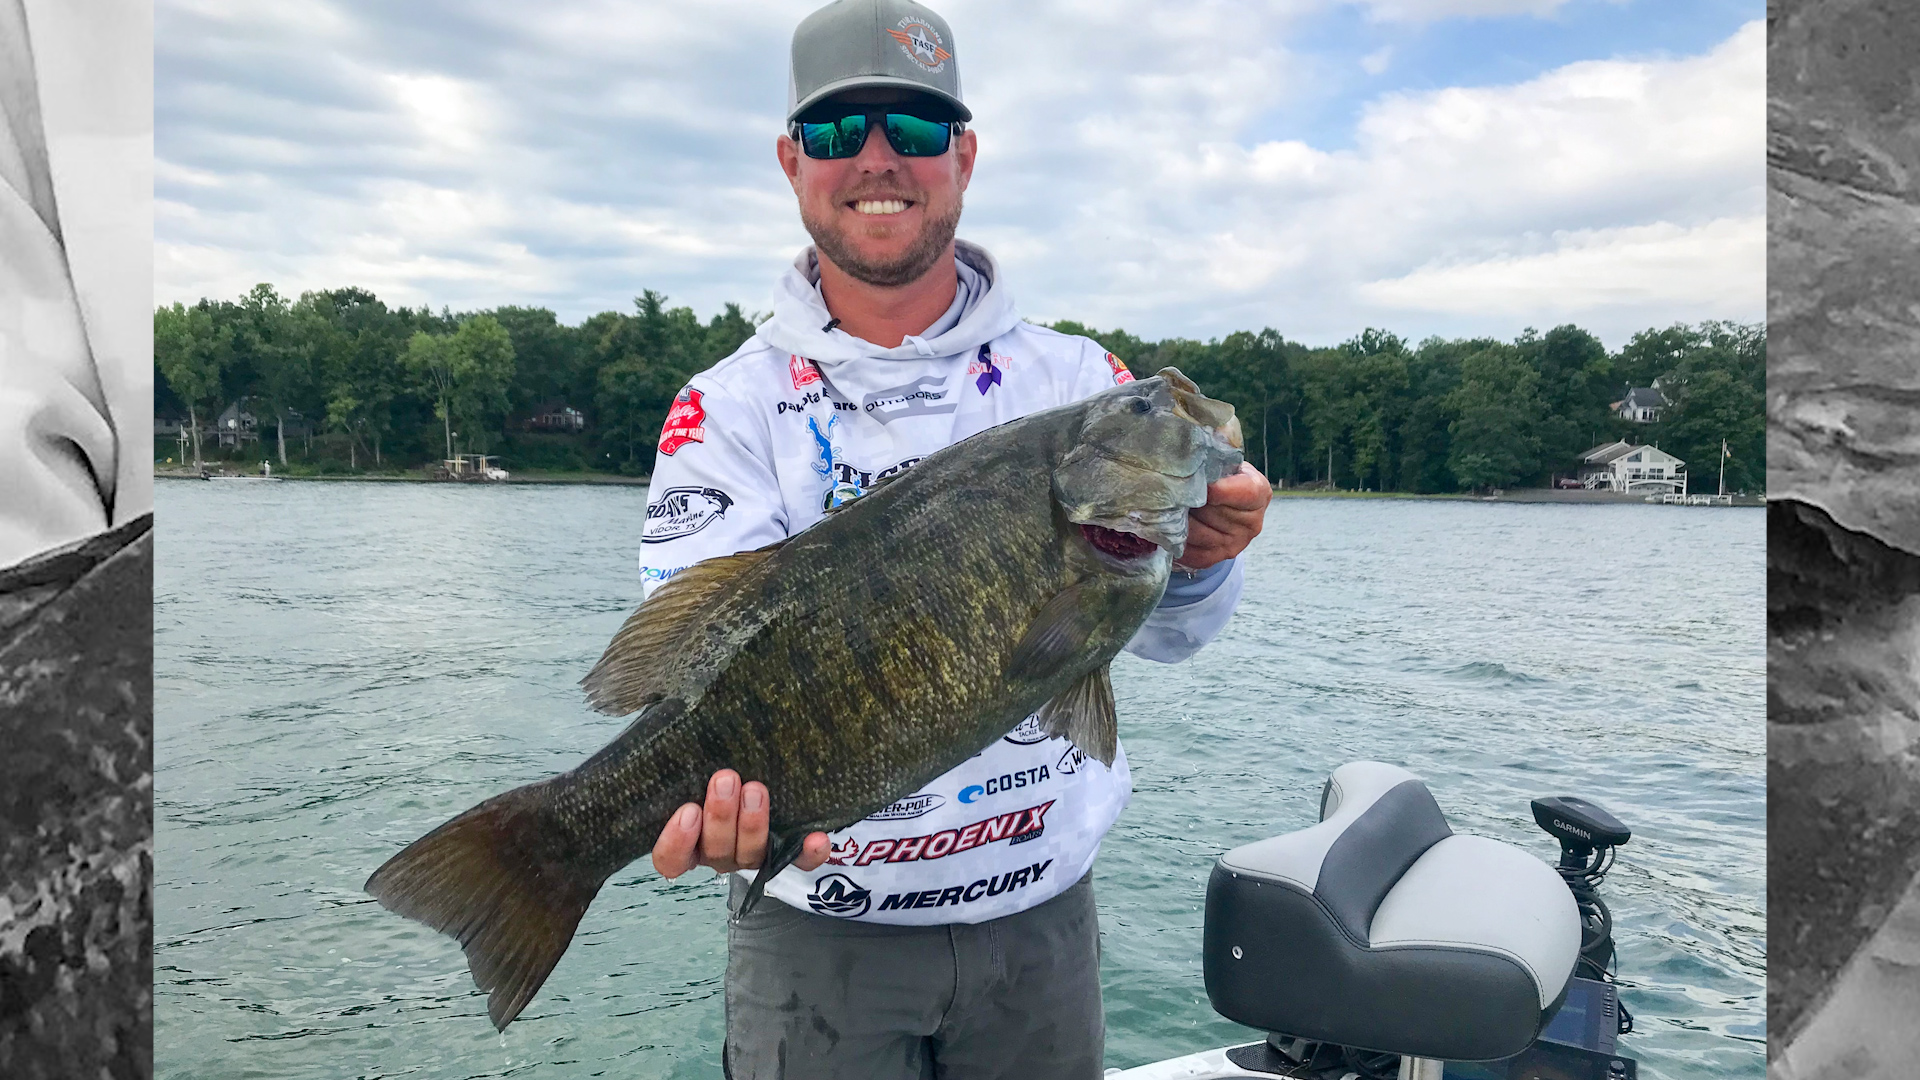 Dakota Ebare Sets a Bass Pro Tour Record with this Giant